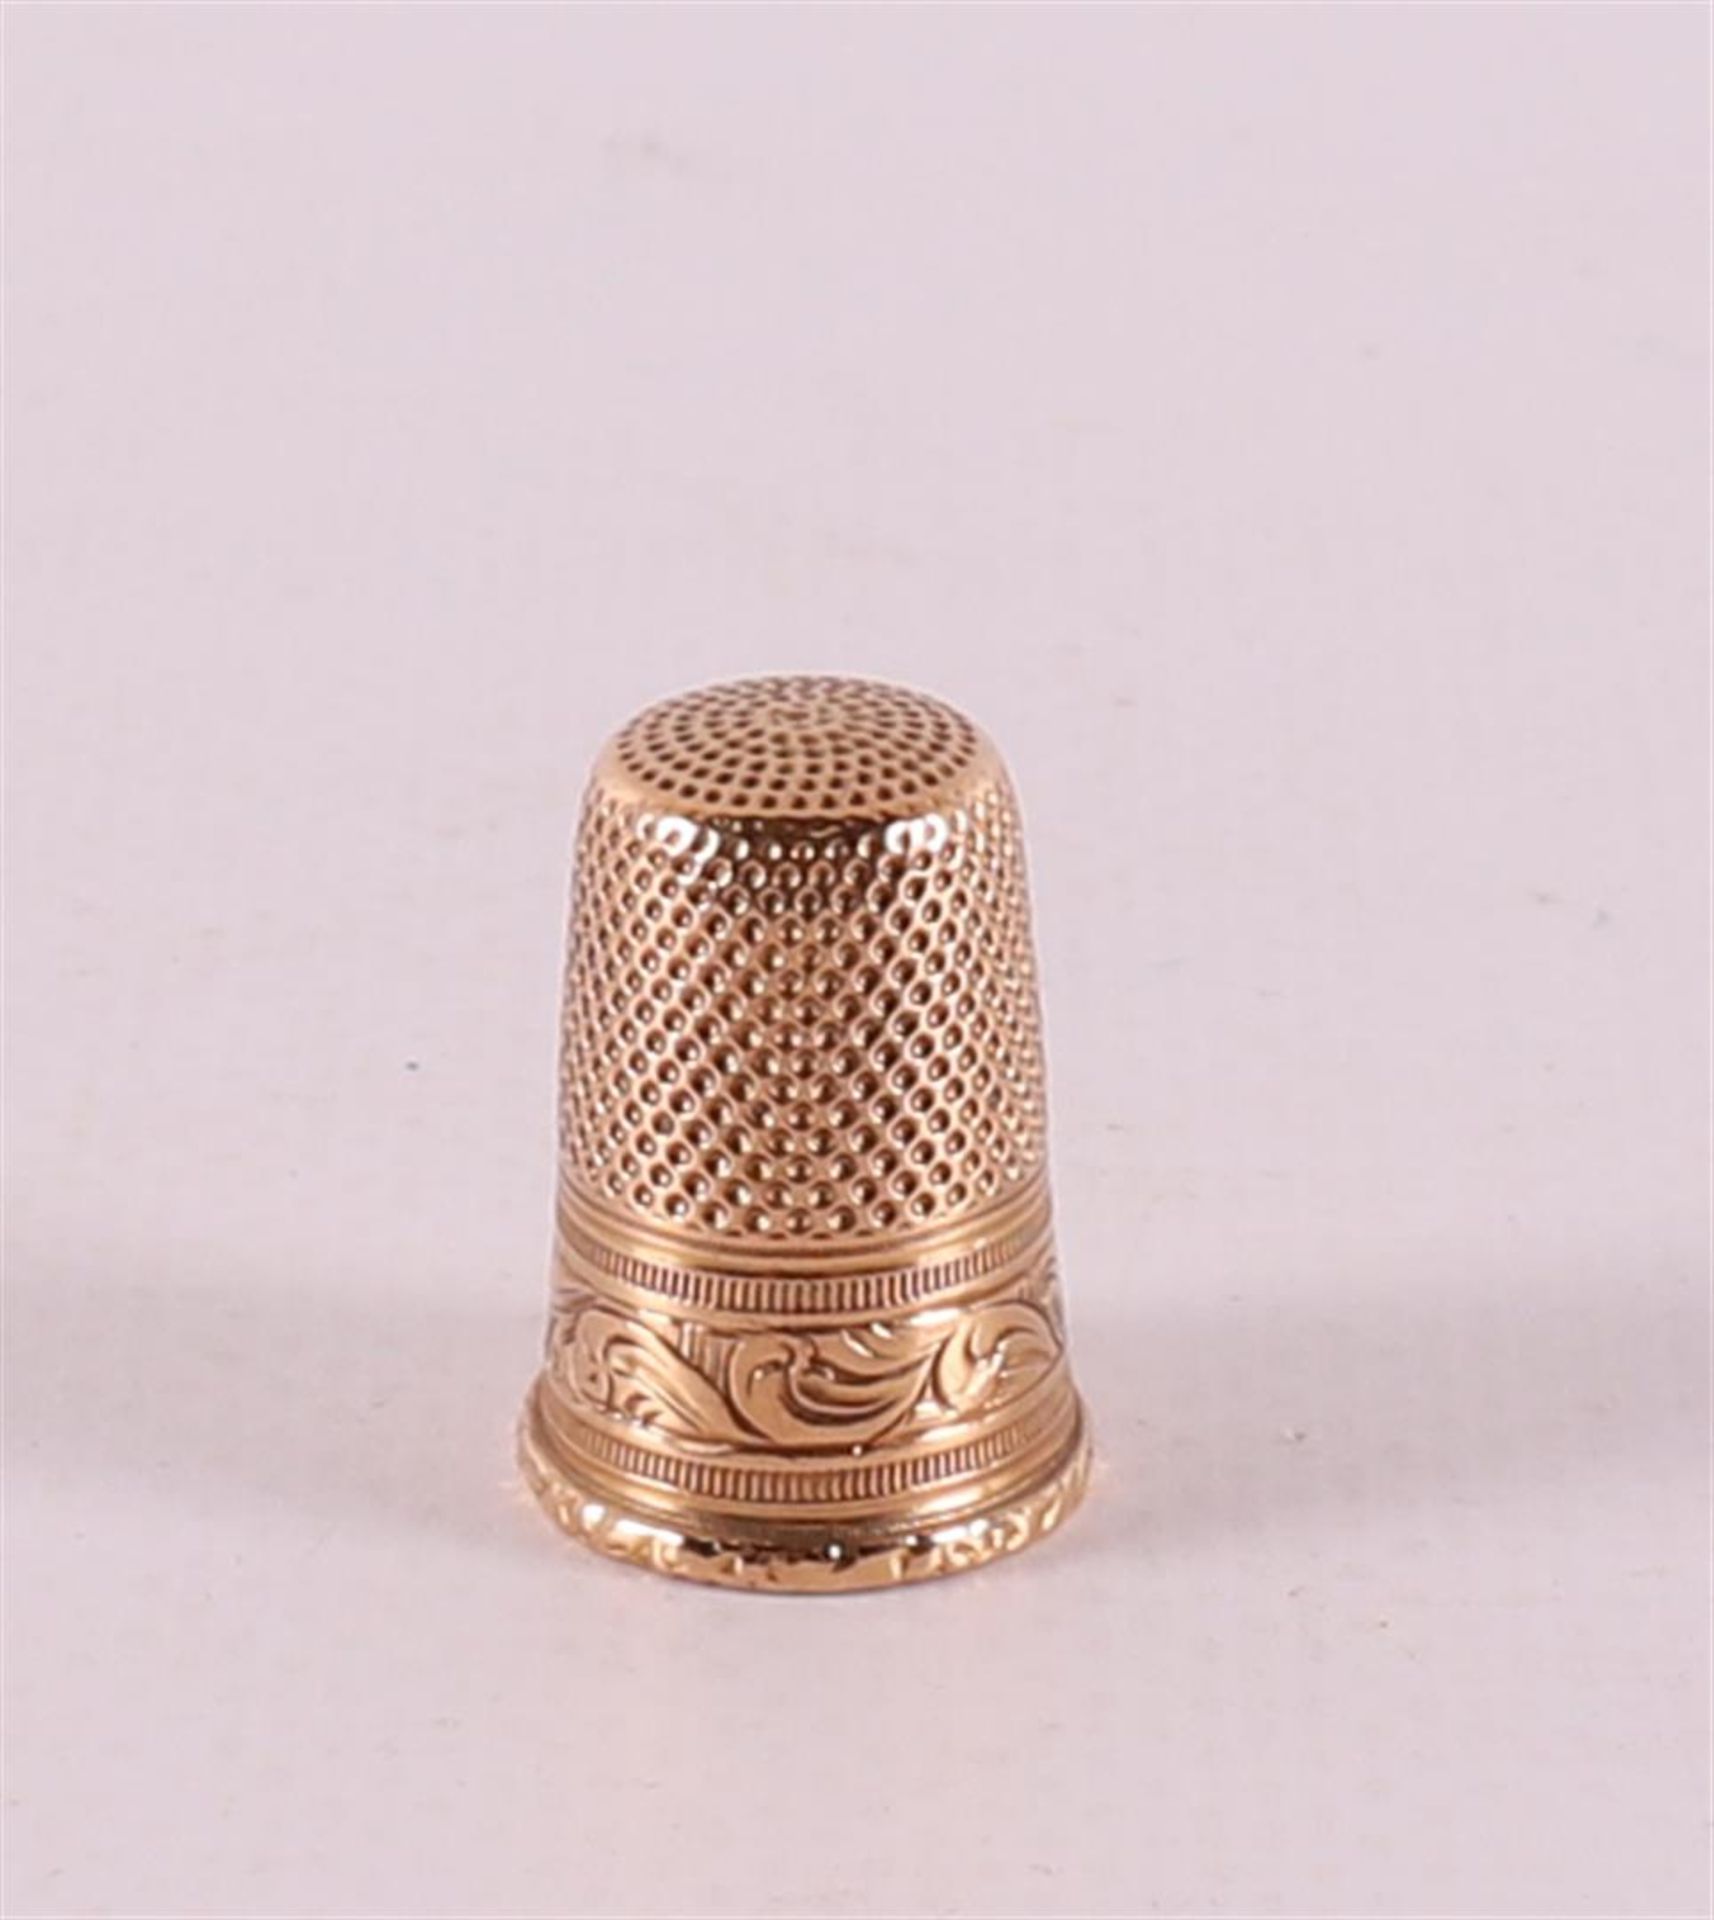 A 14 kt 585/1000 yellow gold thimble, around 1900 - Image 2 of 2